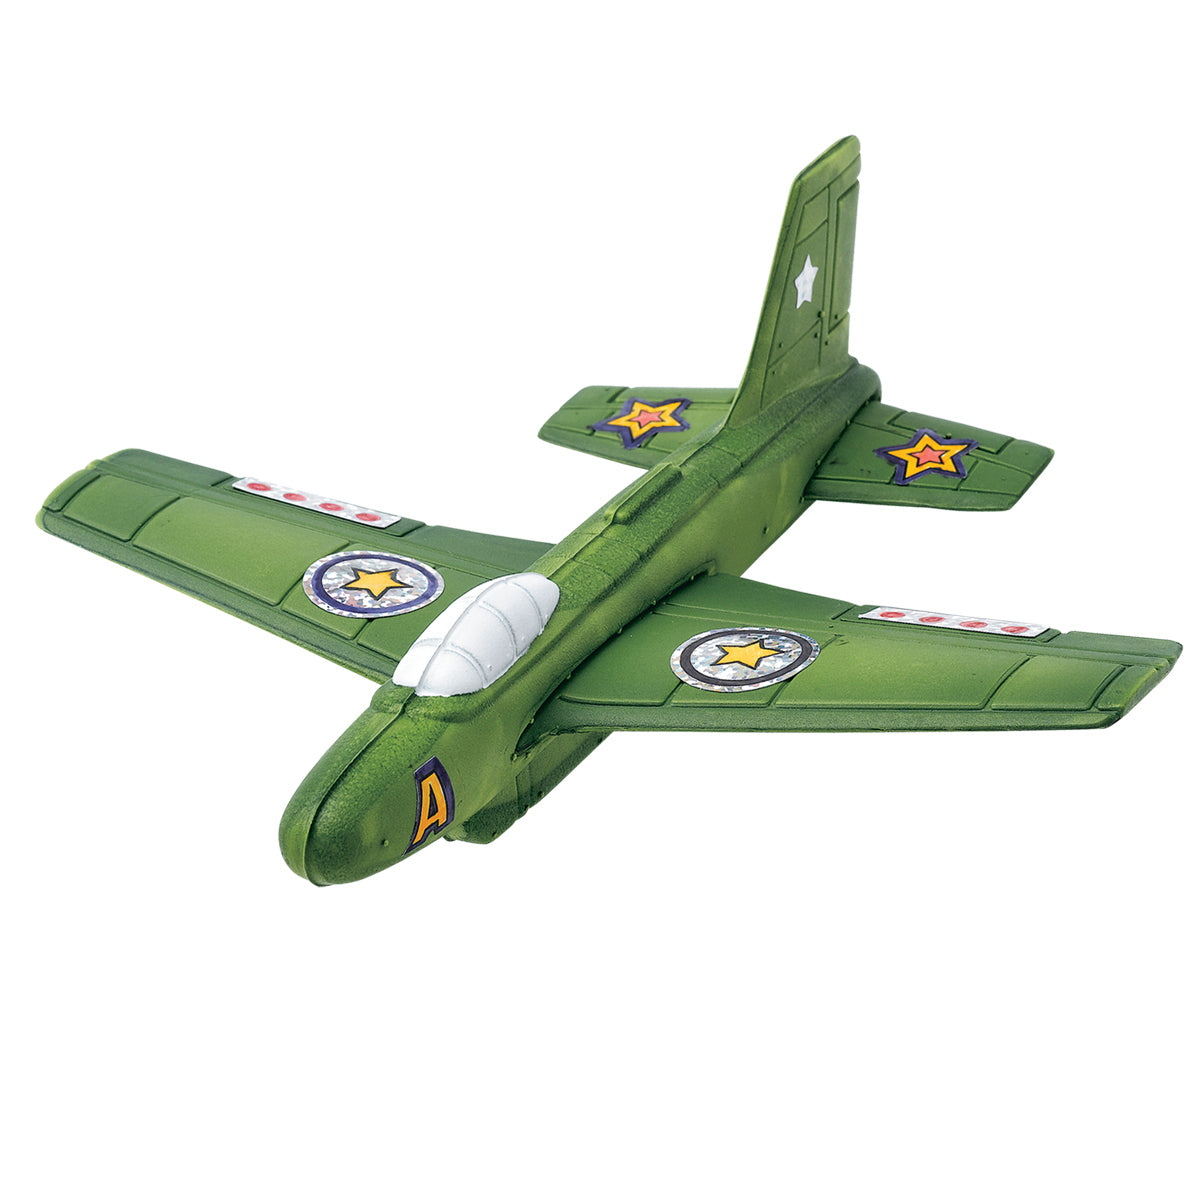 military green toy plane with stickers on wings